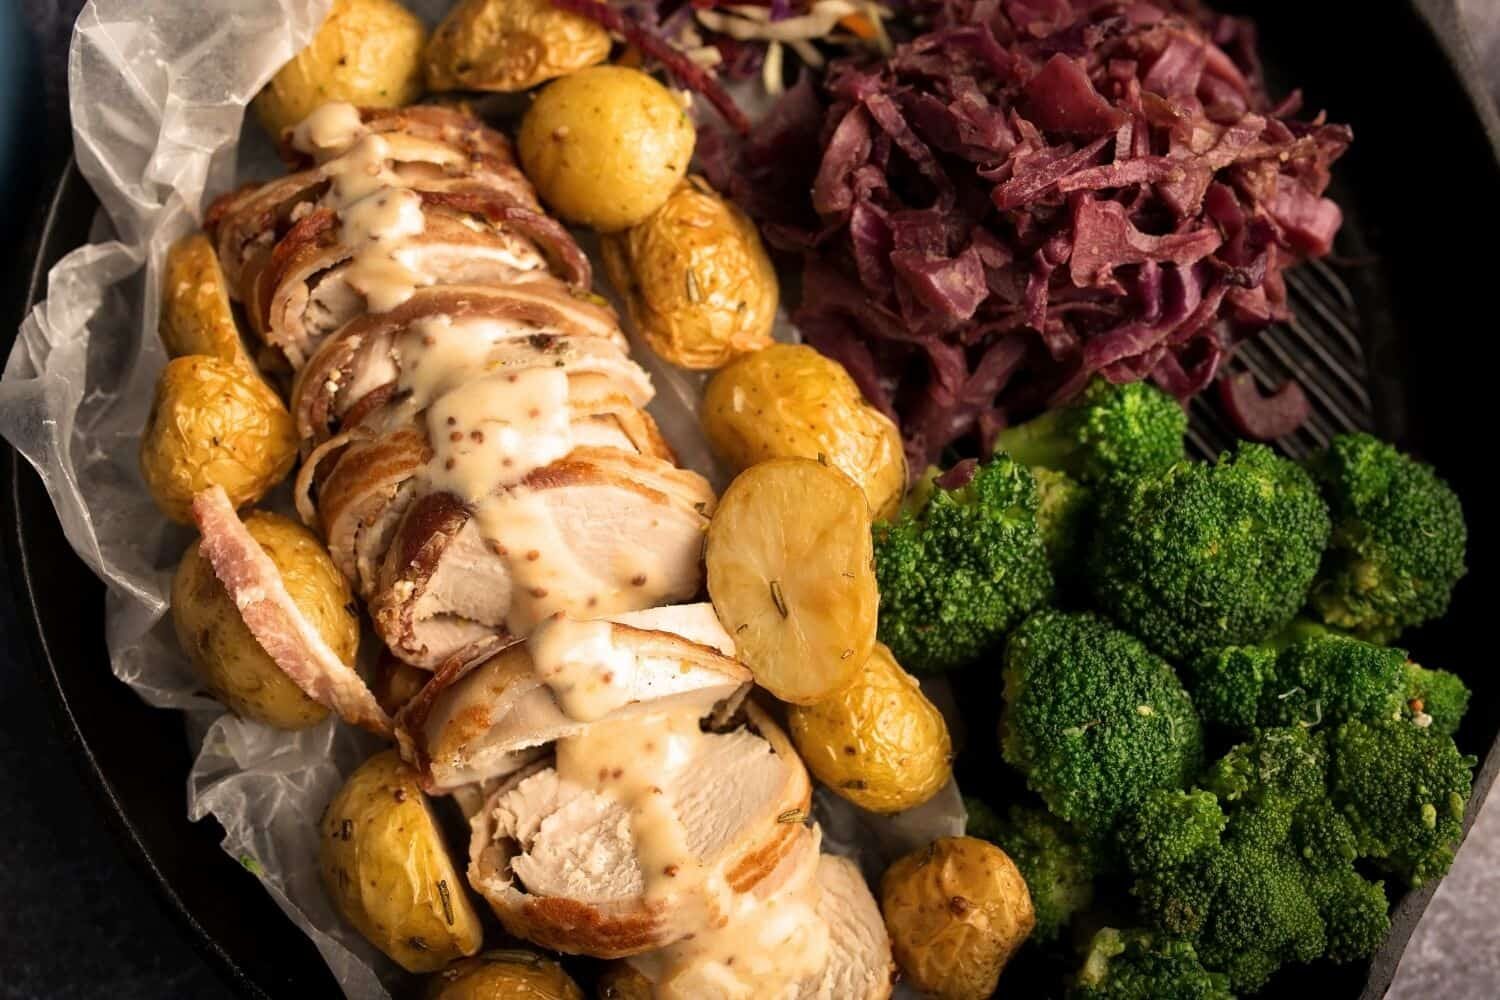 Bacon Wrapped Pork Fillet OR Chicken with Braised Red Cabbage, Roast Potato & Broccoli